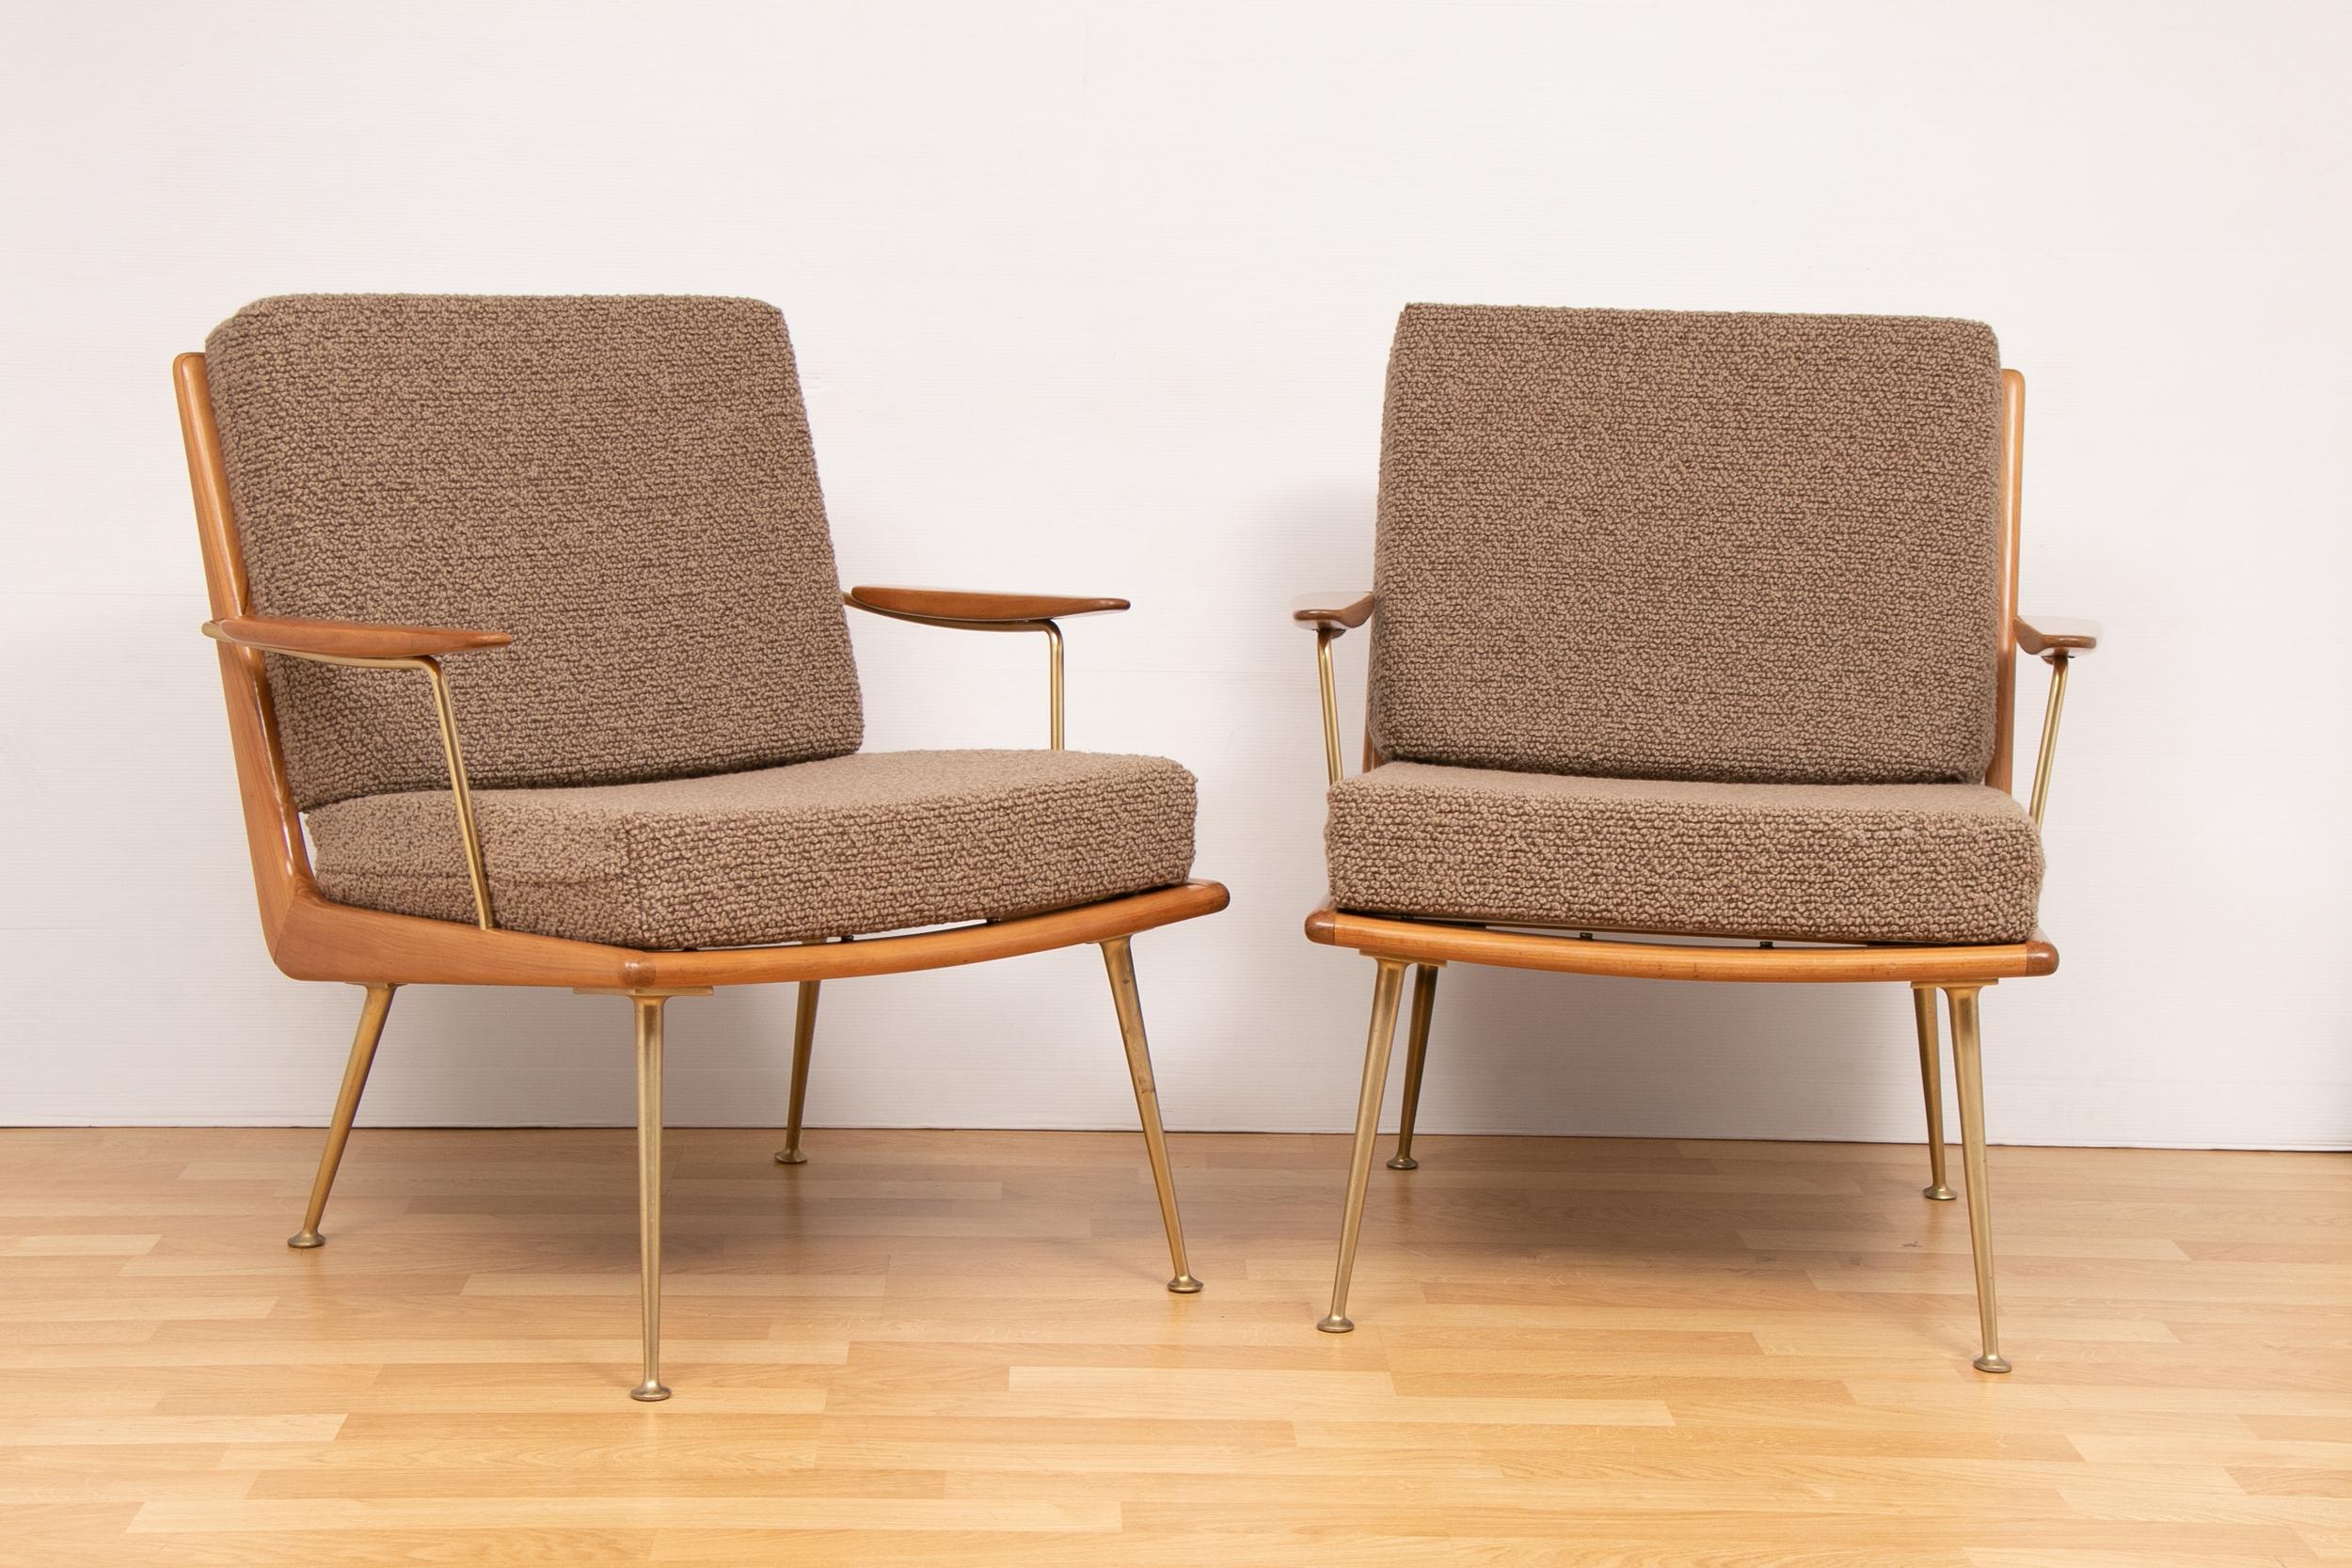 1950s Boomerang Sofa & 2 Easy Chairs by Hans Mitzlaff for Soloform, Germany 1